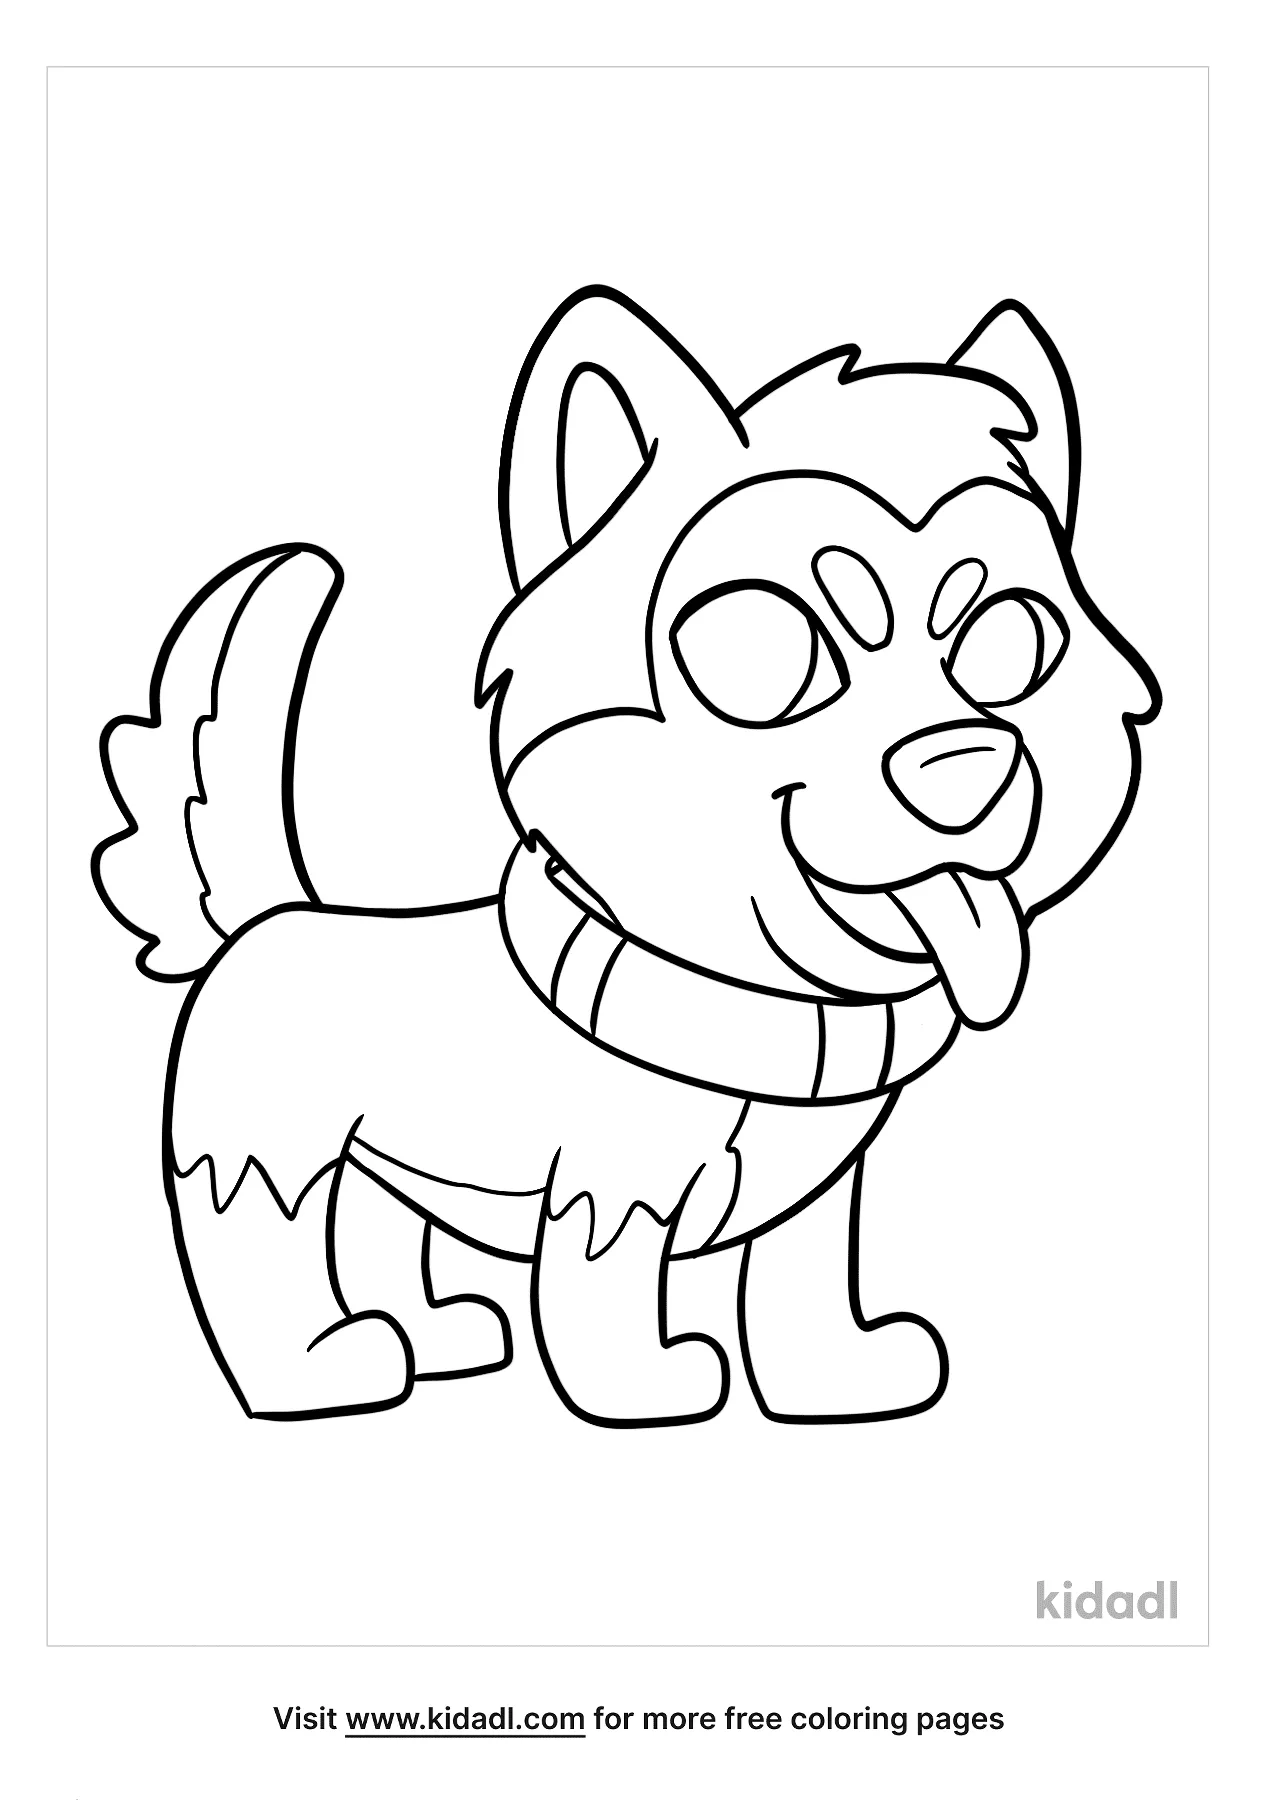 Free Cute Baby Husky Coloring Page | Coloring Page Printables | Kidadl